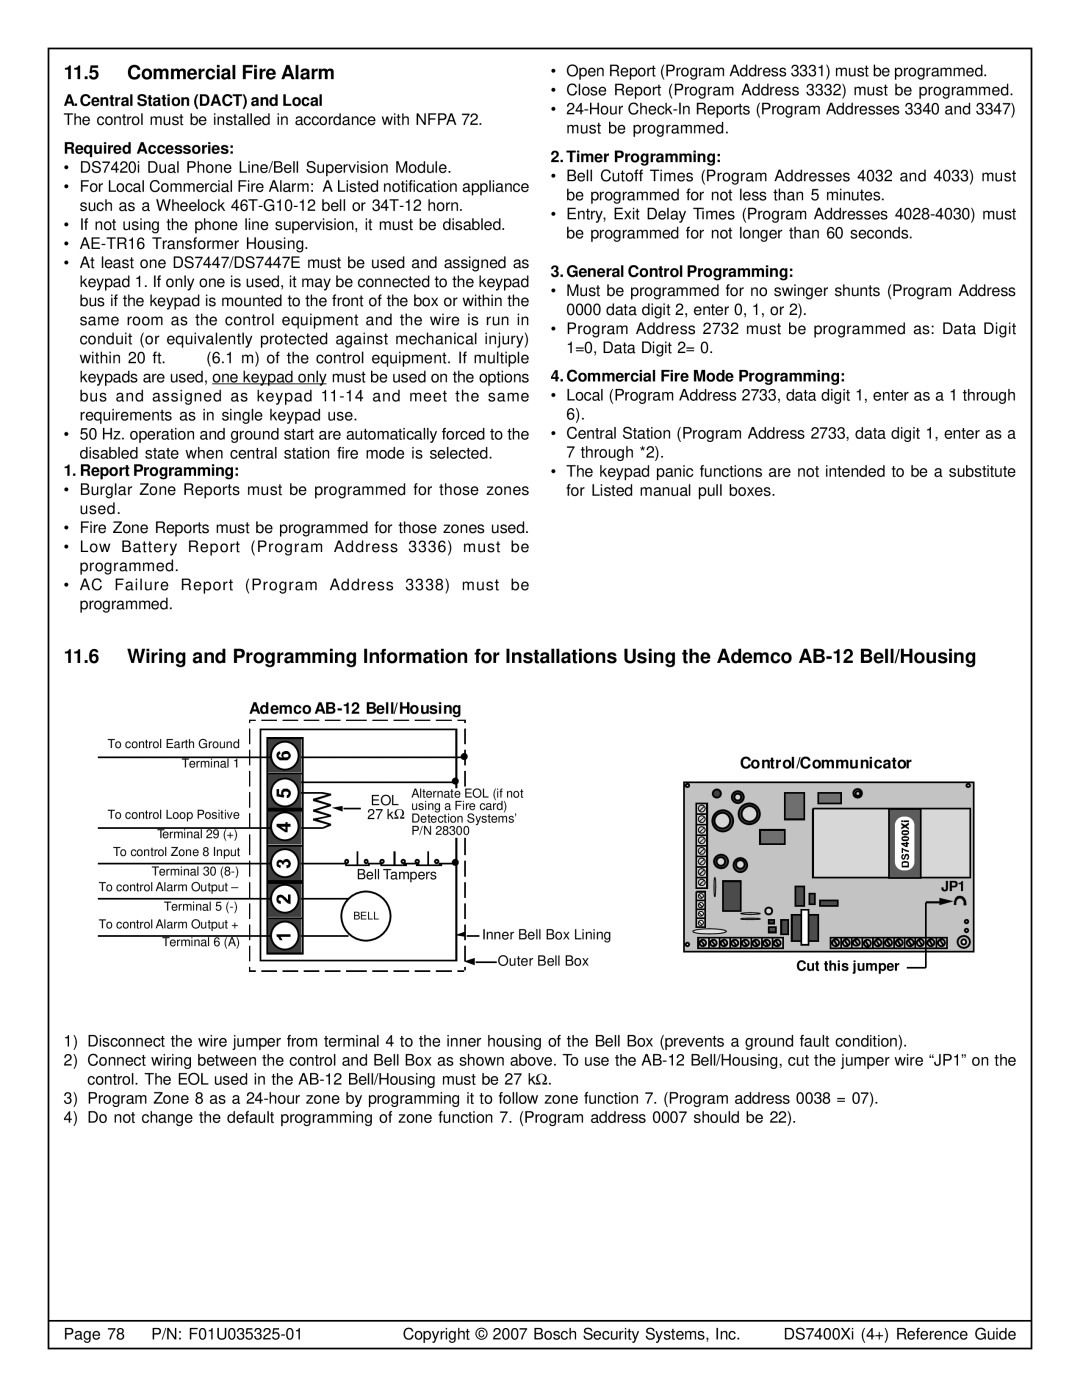 Bosch Appliances DS7400XI A.Central Station DACT and Local, Required Accessories, Report Programming, Timer Programming 